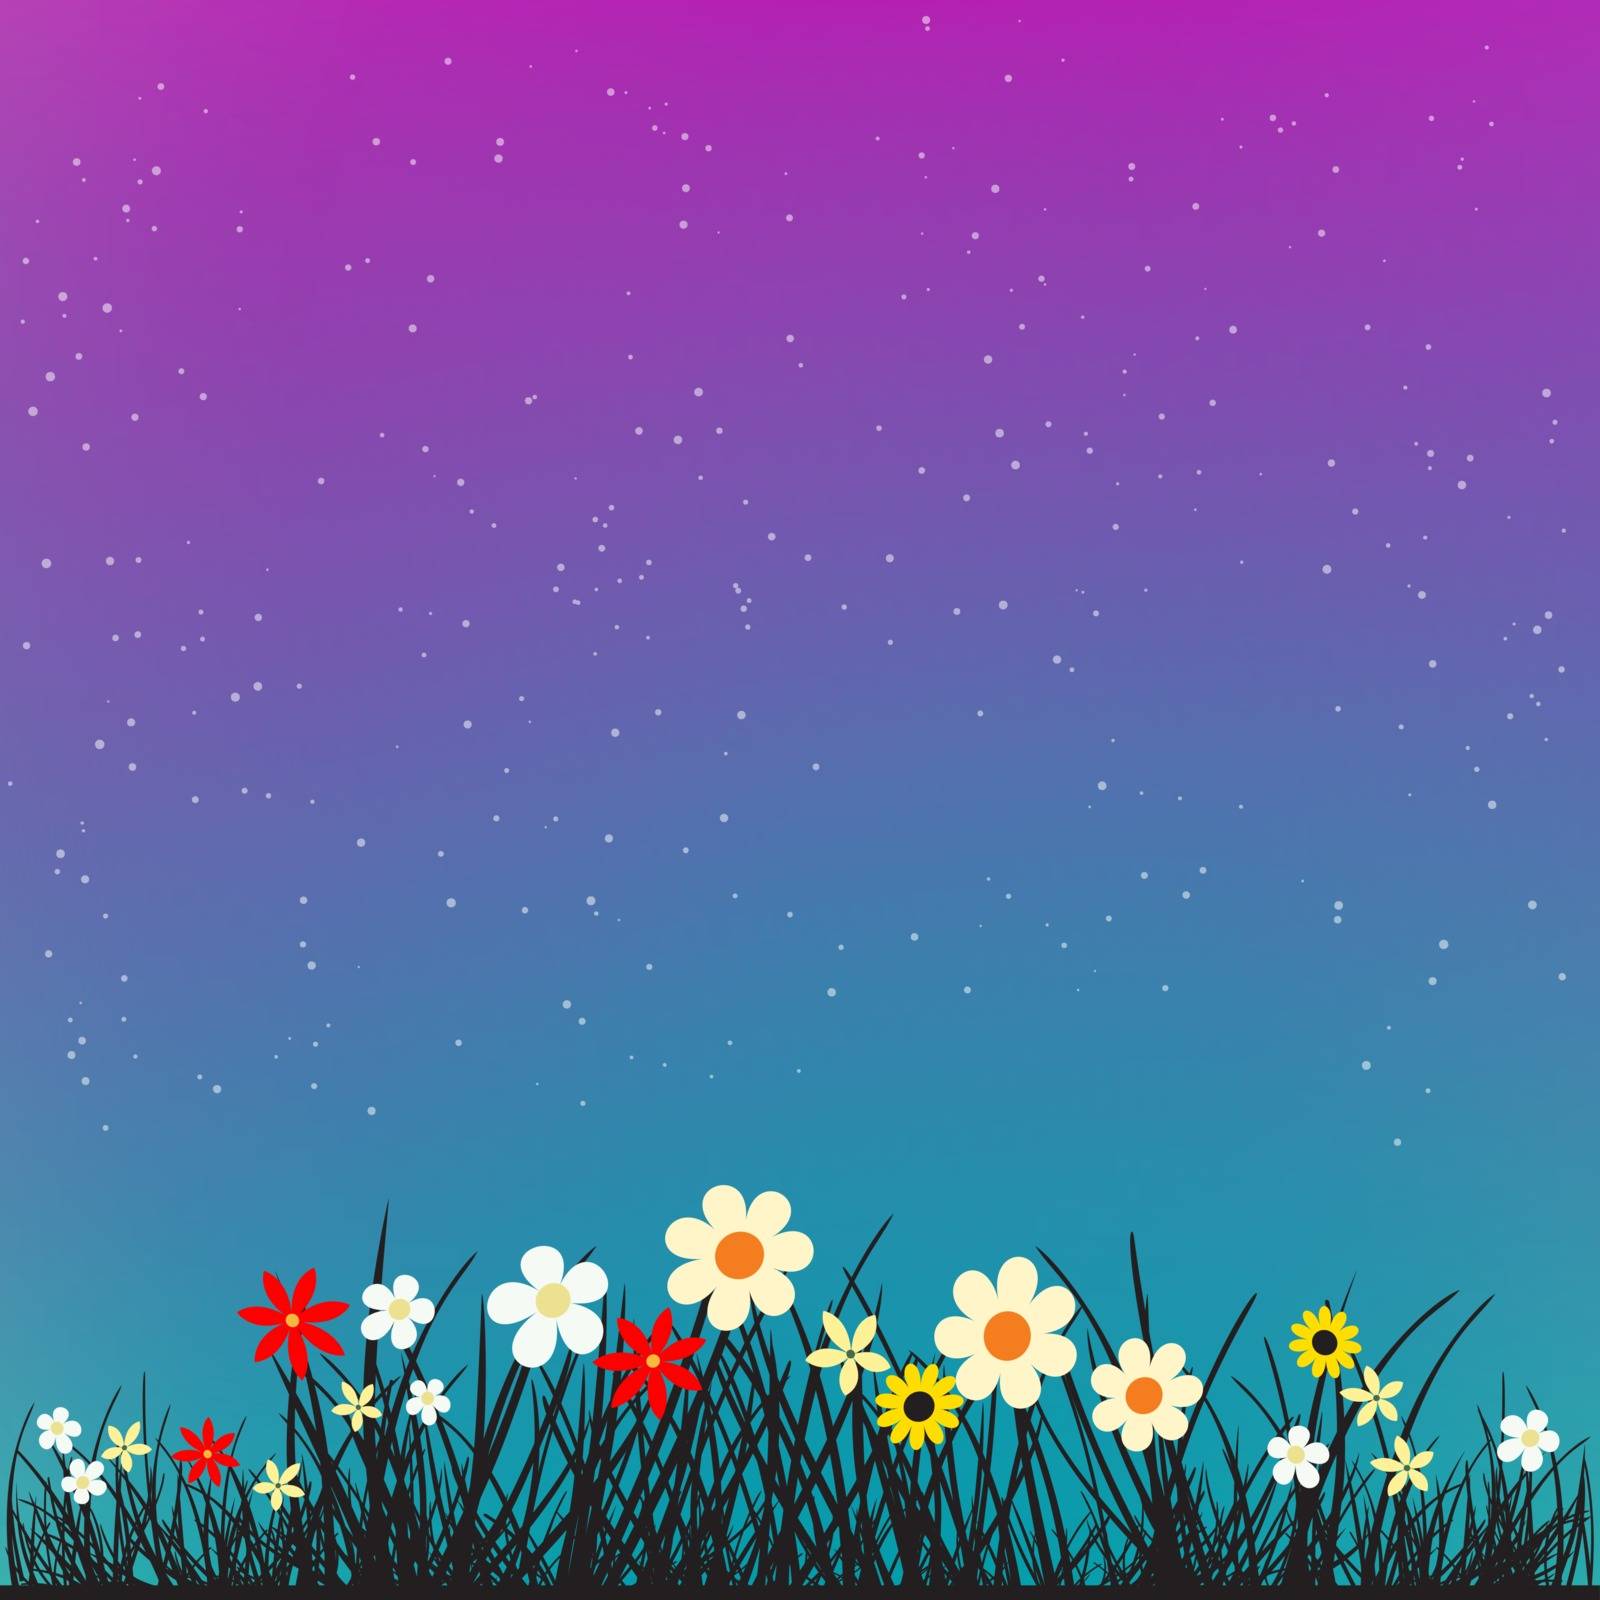 grass and flowers on night backdrop by romvo